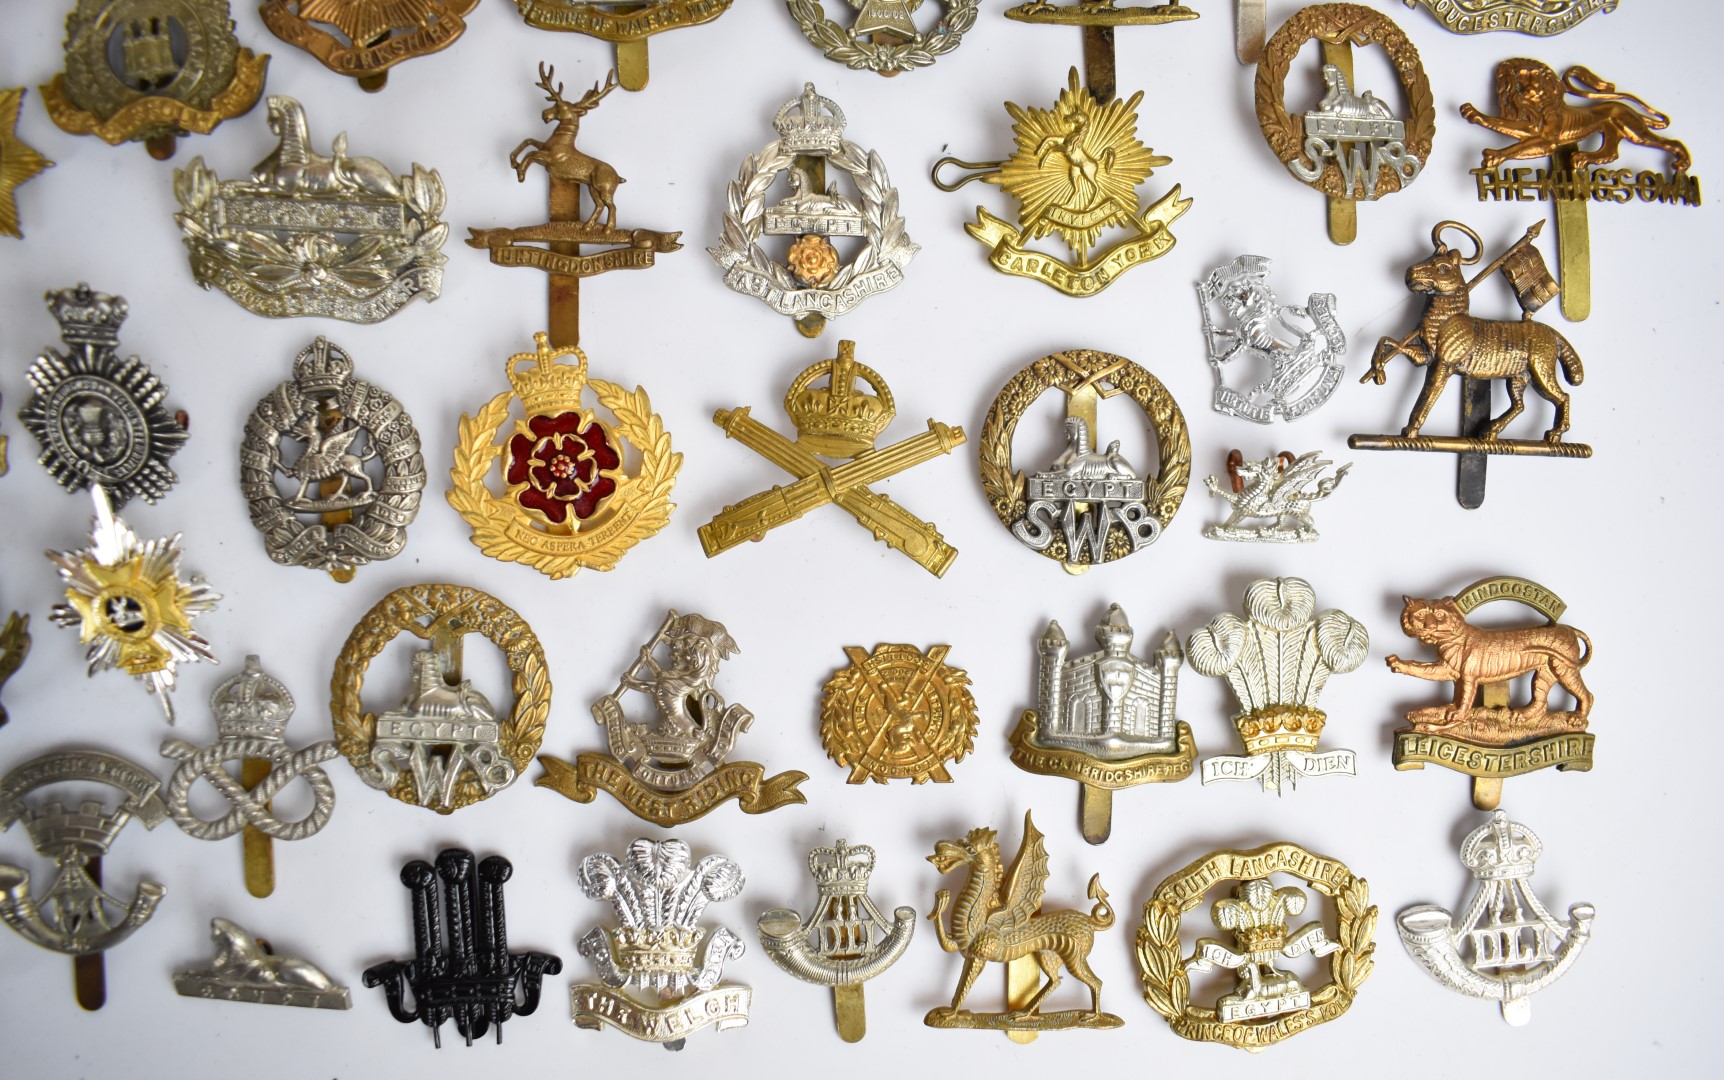 Large collection of approximately 100 British Army cap badges including Royal Sussex Regiment, - Image 3 of 14